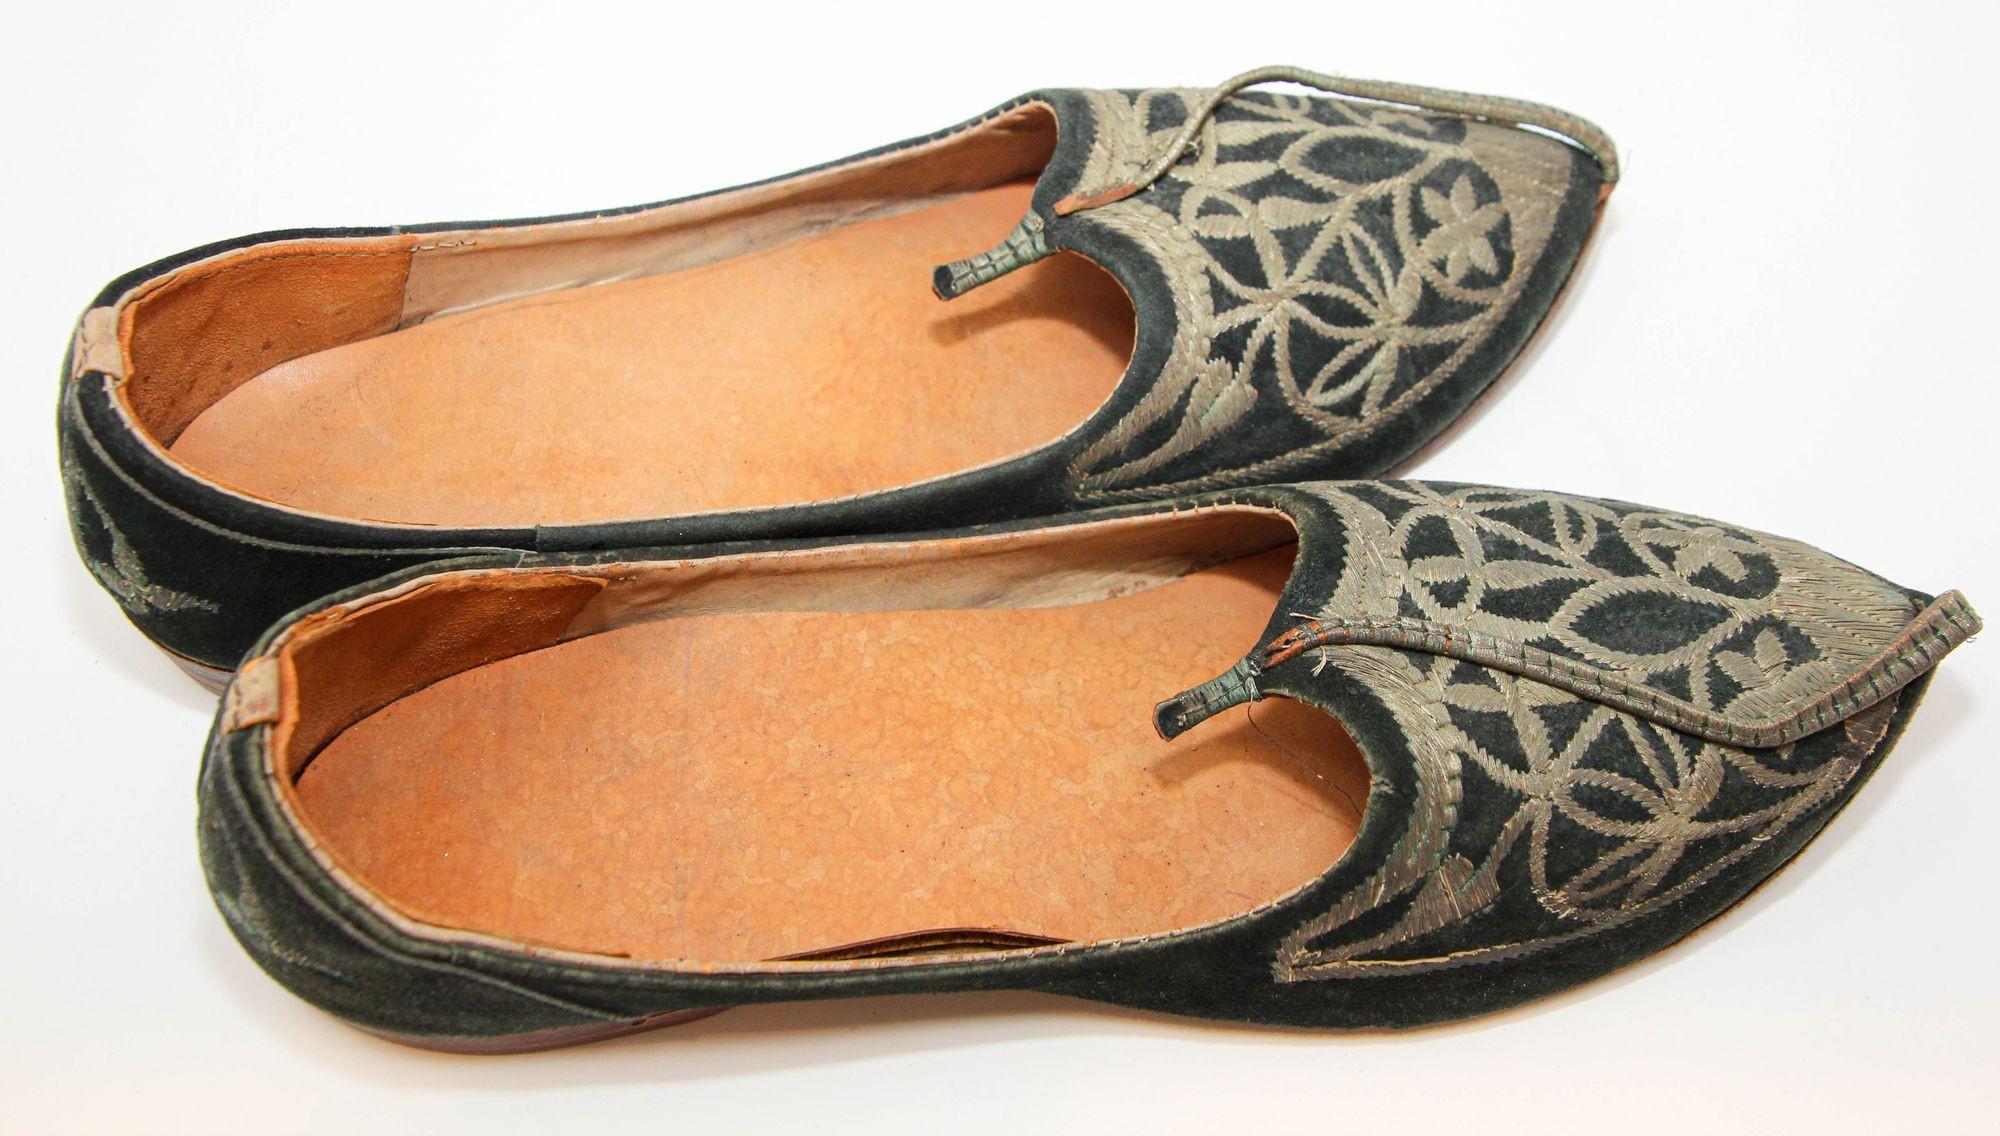 20th Century Moorish Mughal Style Curled Toe Black Leather Shoes from Tony Duquette Estate For Sale